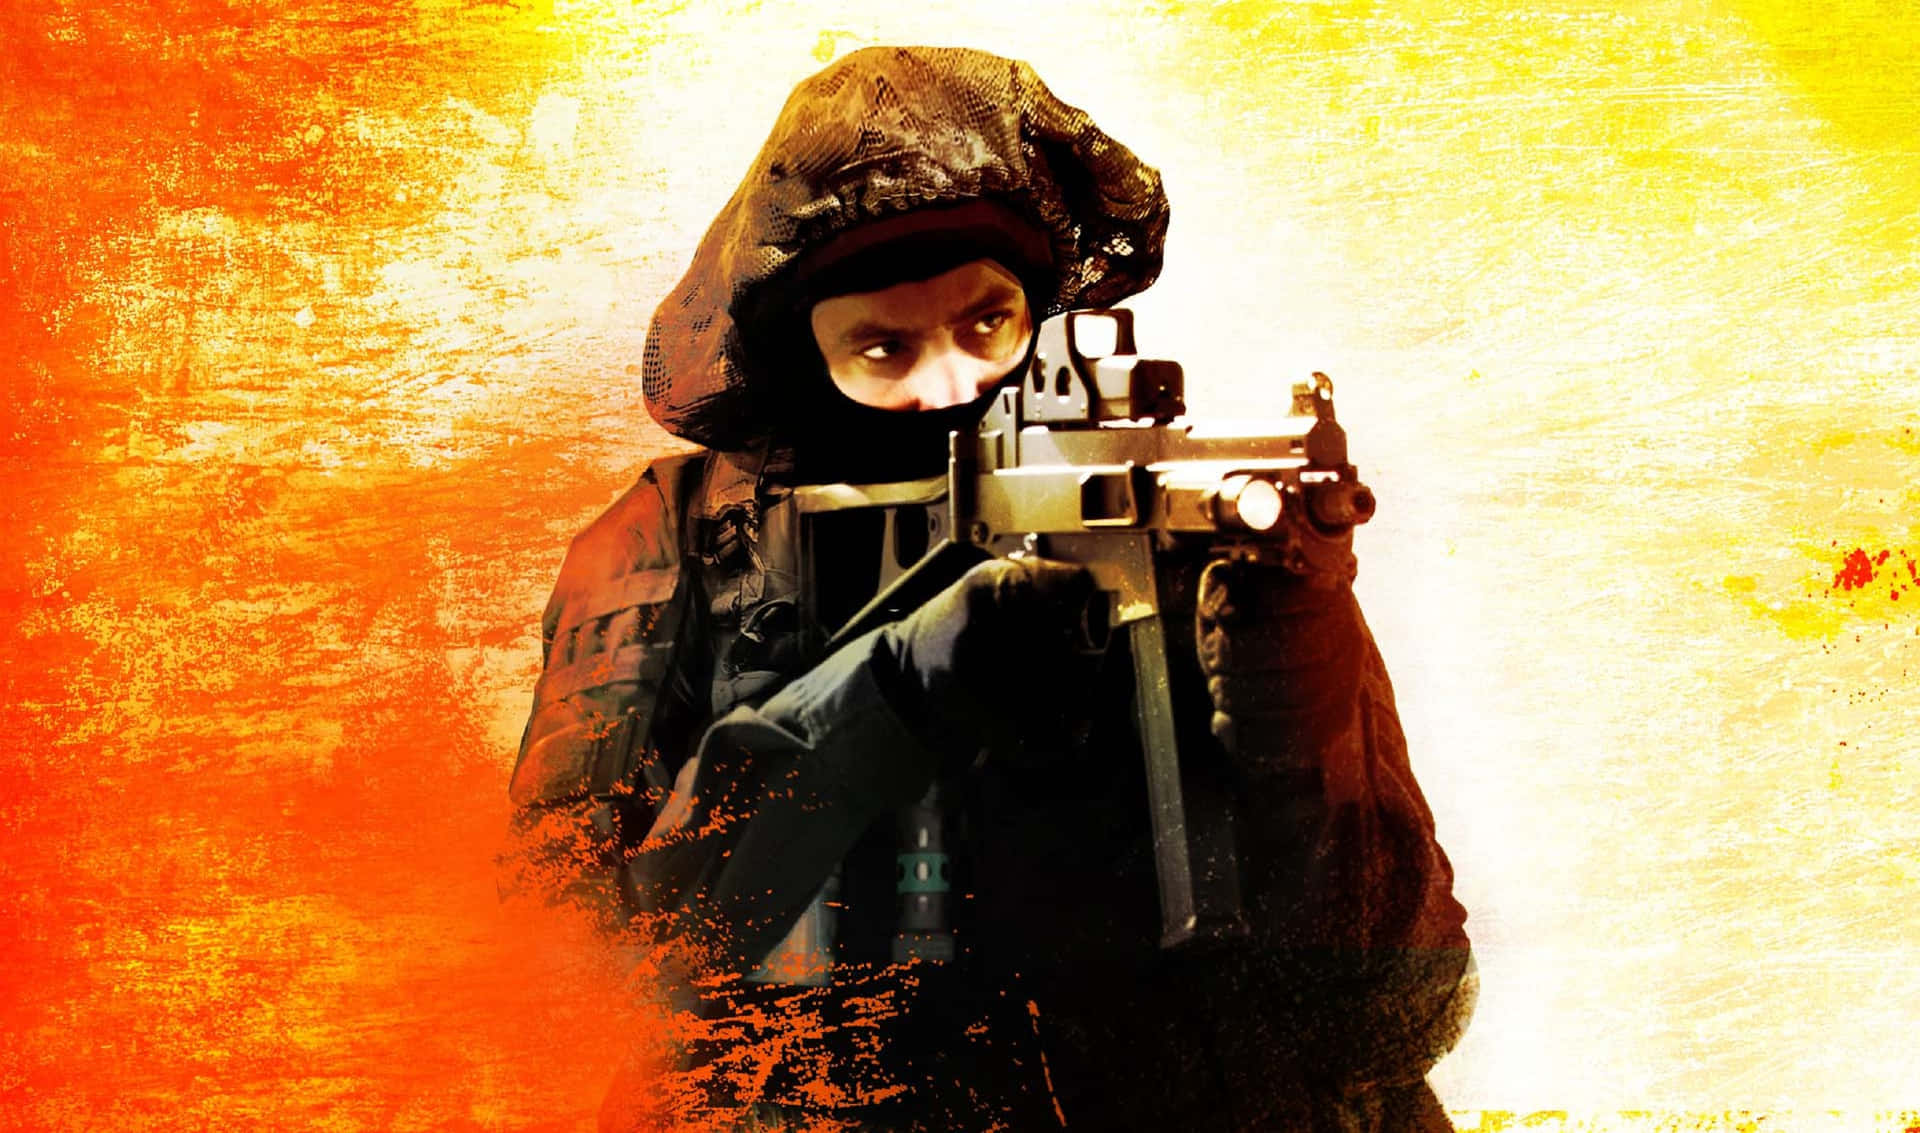 Counterstrike - Global Offensive.